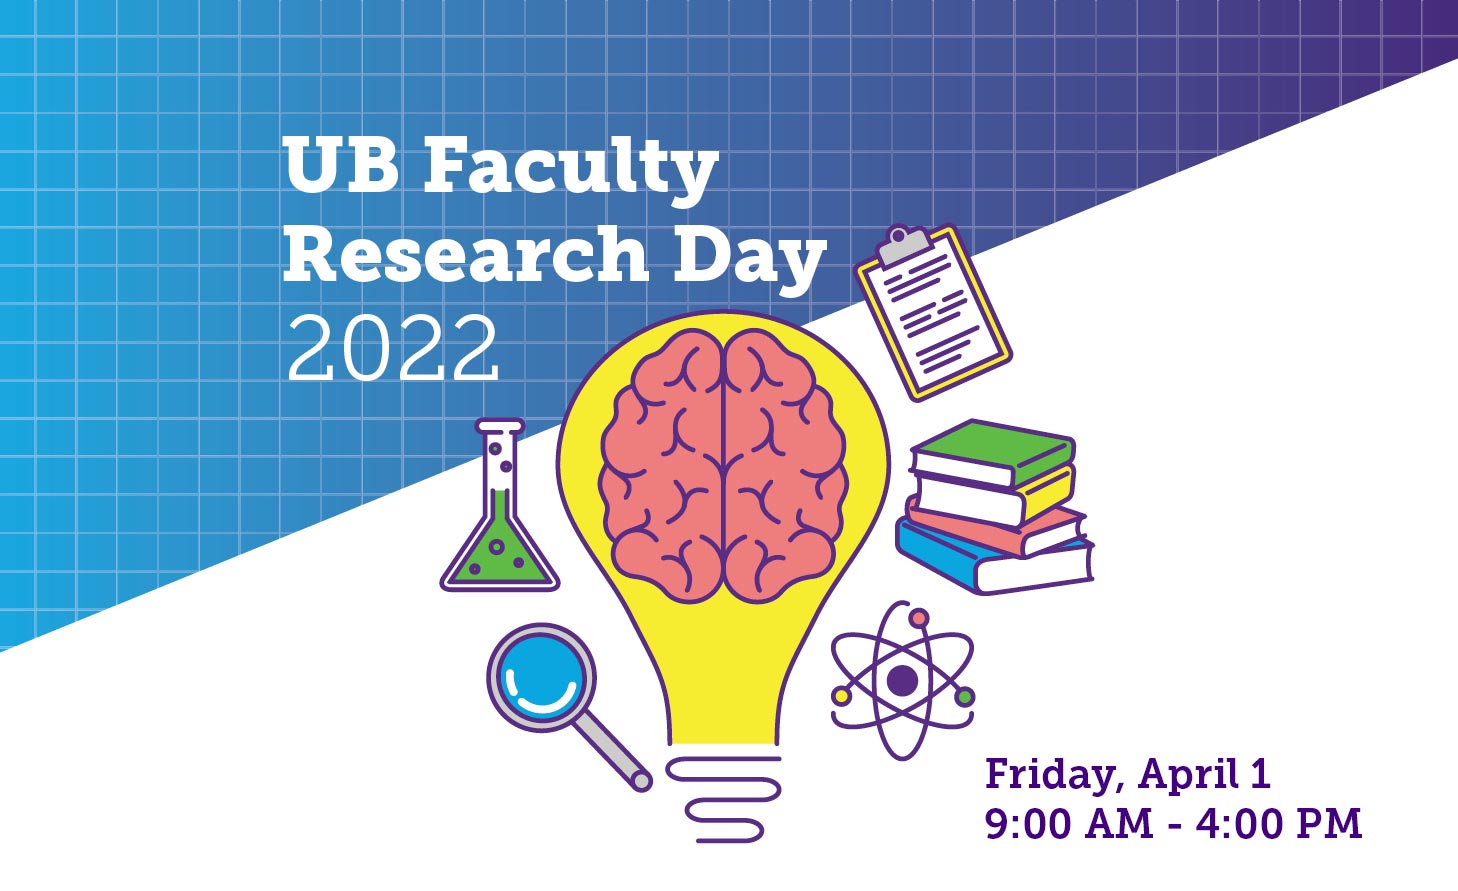 UB Faculty Research Day 2022 - Friday, April 1, 9:00 AM - 4:00 PM